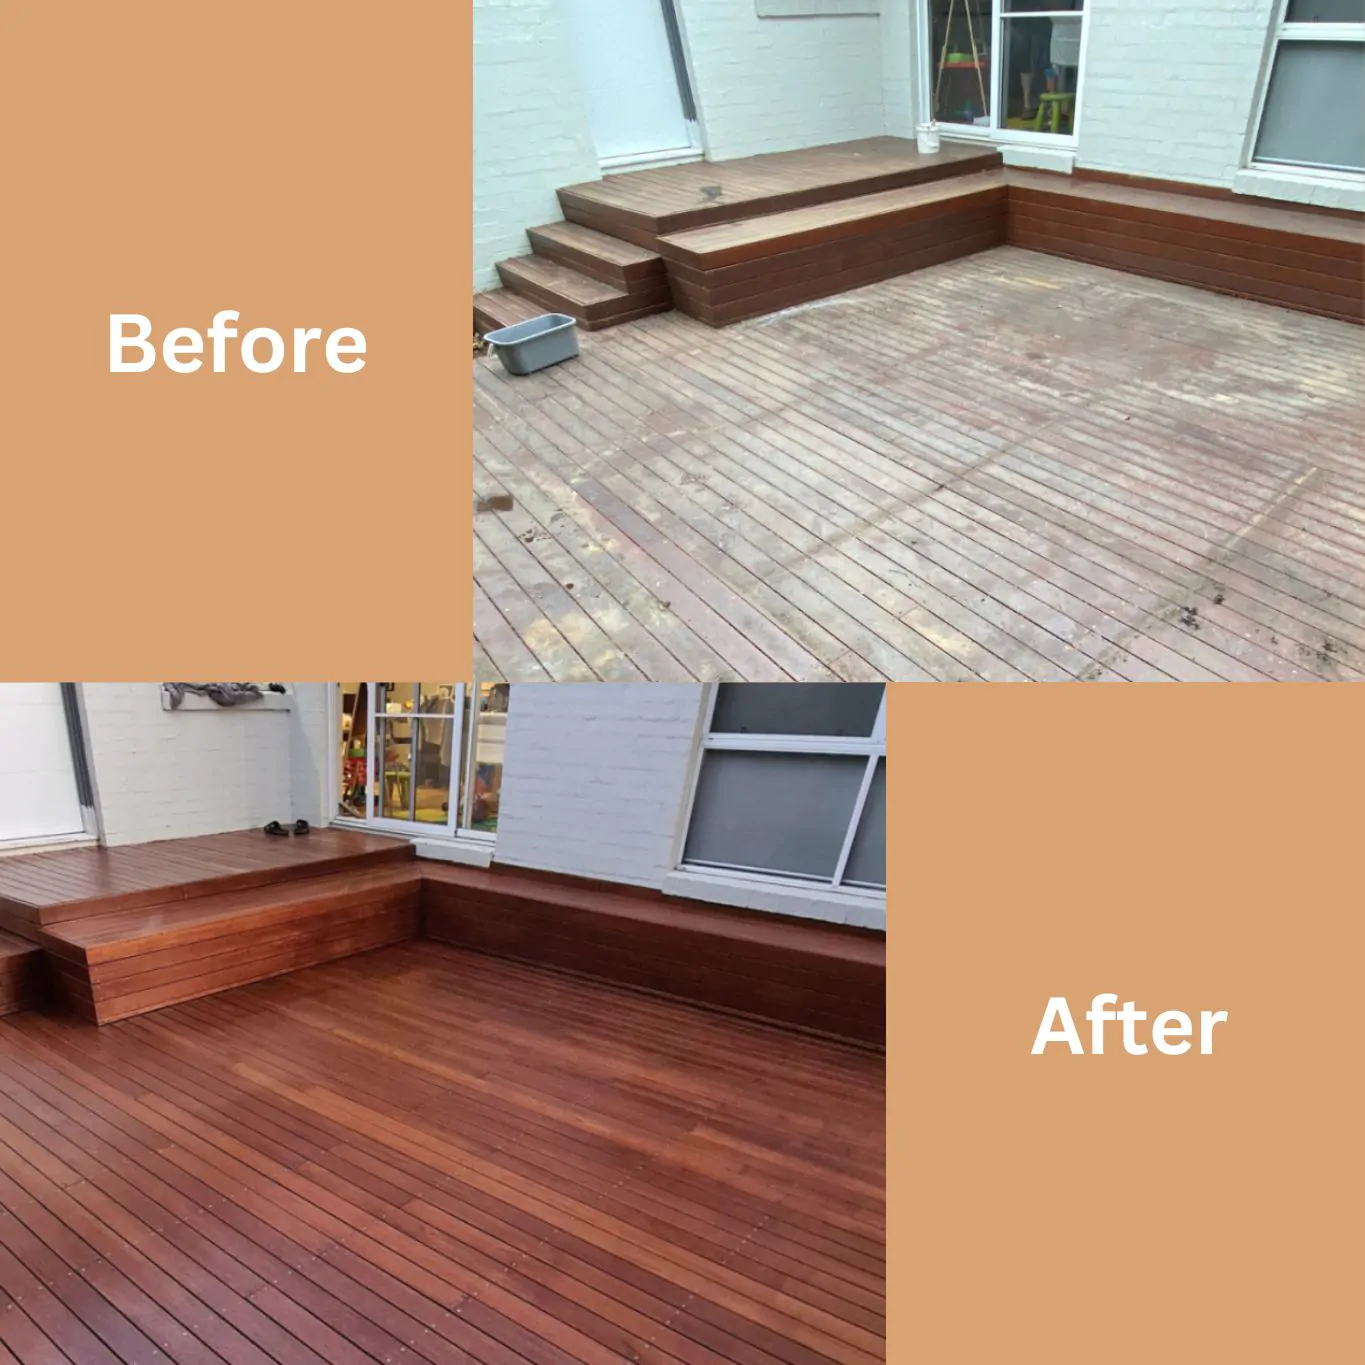 Before and After Deck Restoration Services - All Pro Cherry Hill Deck Builders